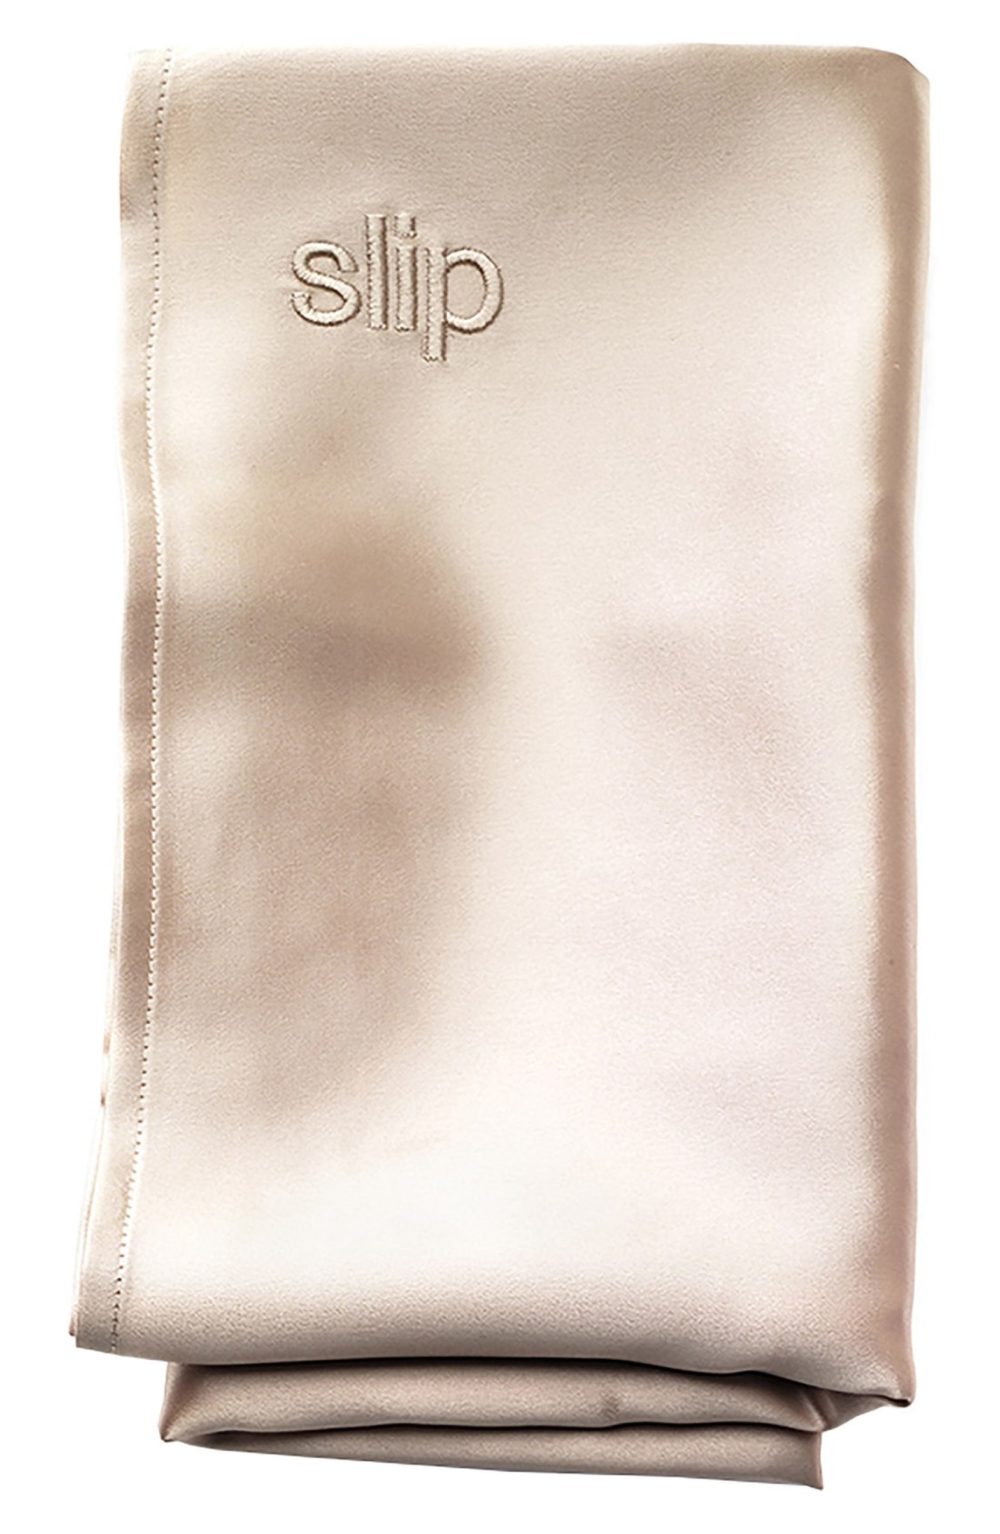 silk pillow case for anti-aging